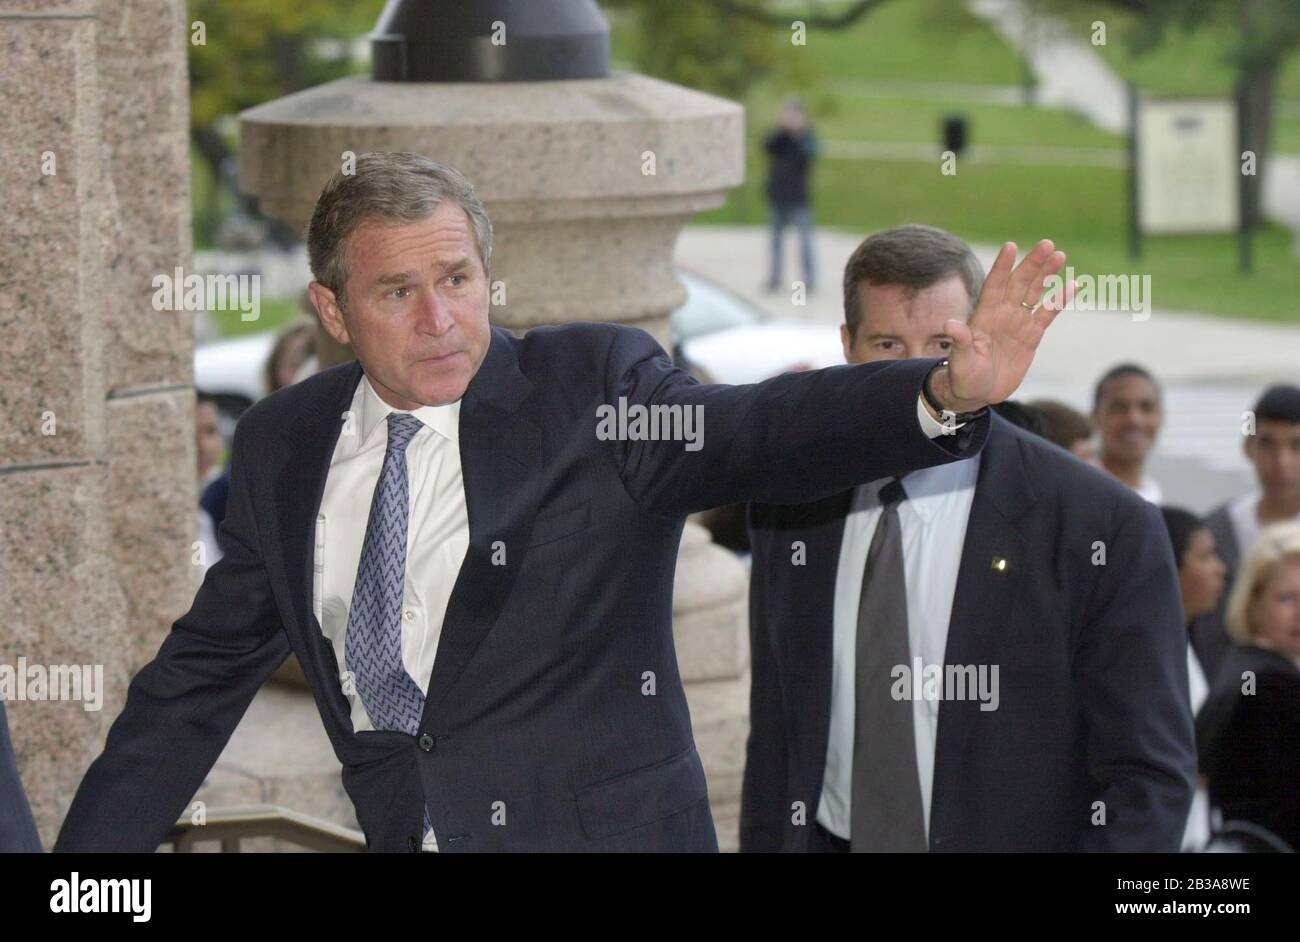 Austin, Texas USA, 22 NOV 2000: Texas governor and Republican presidential nominee George W. Bush arrives at the Texas Capitol to make a statement to the press following the Florida Supreme Court ruling in favor of ballot recounts in the U.S. presidential election. ©Bob Daemmrich Stock Photo